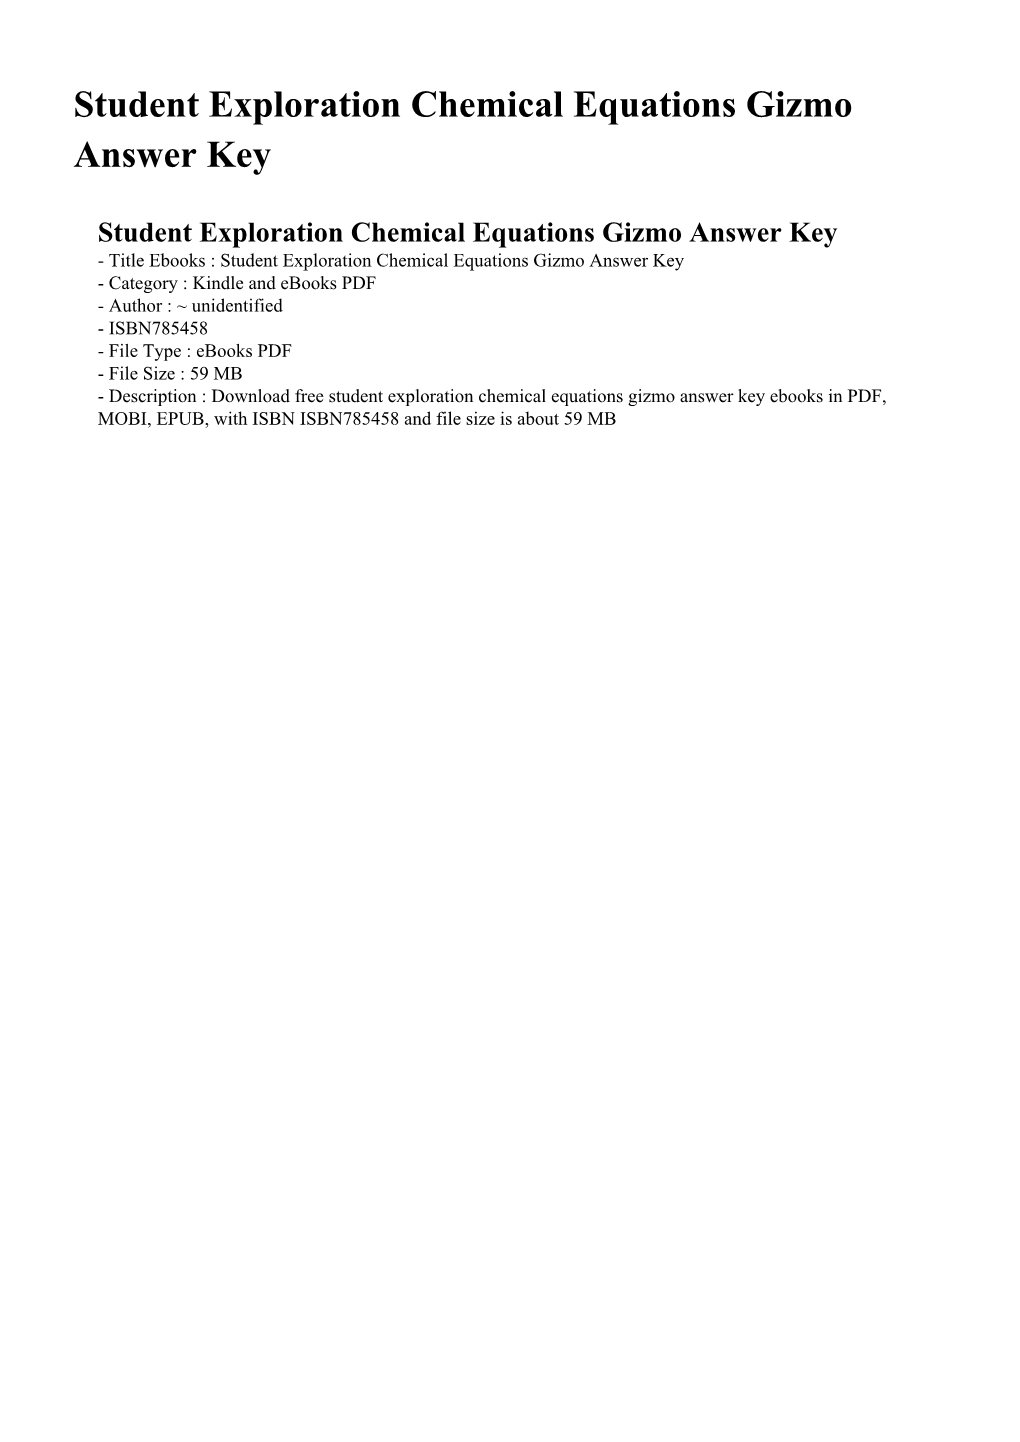 Student Exploration Chemical Equations Gizmo Answer Key